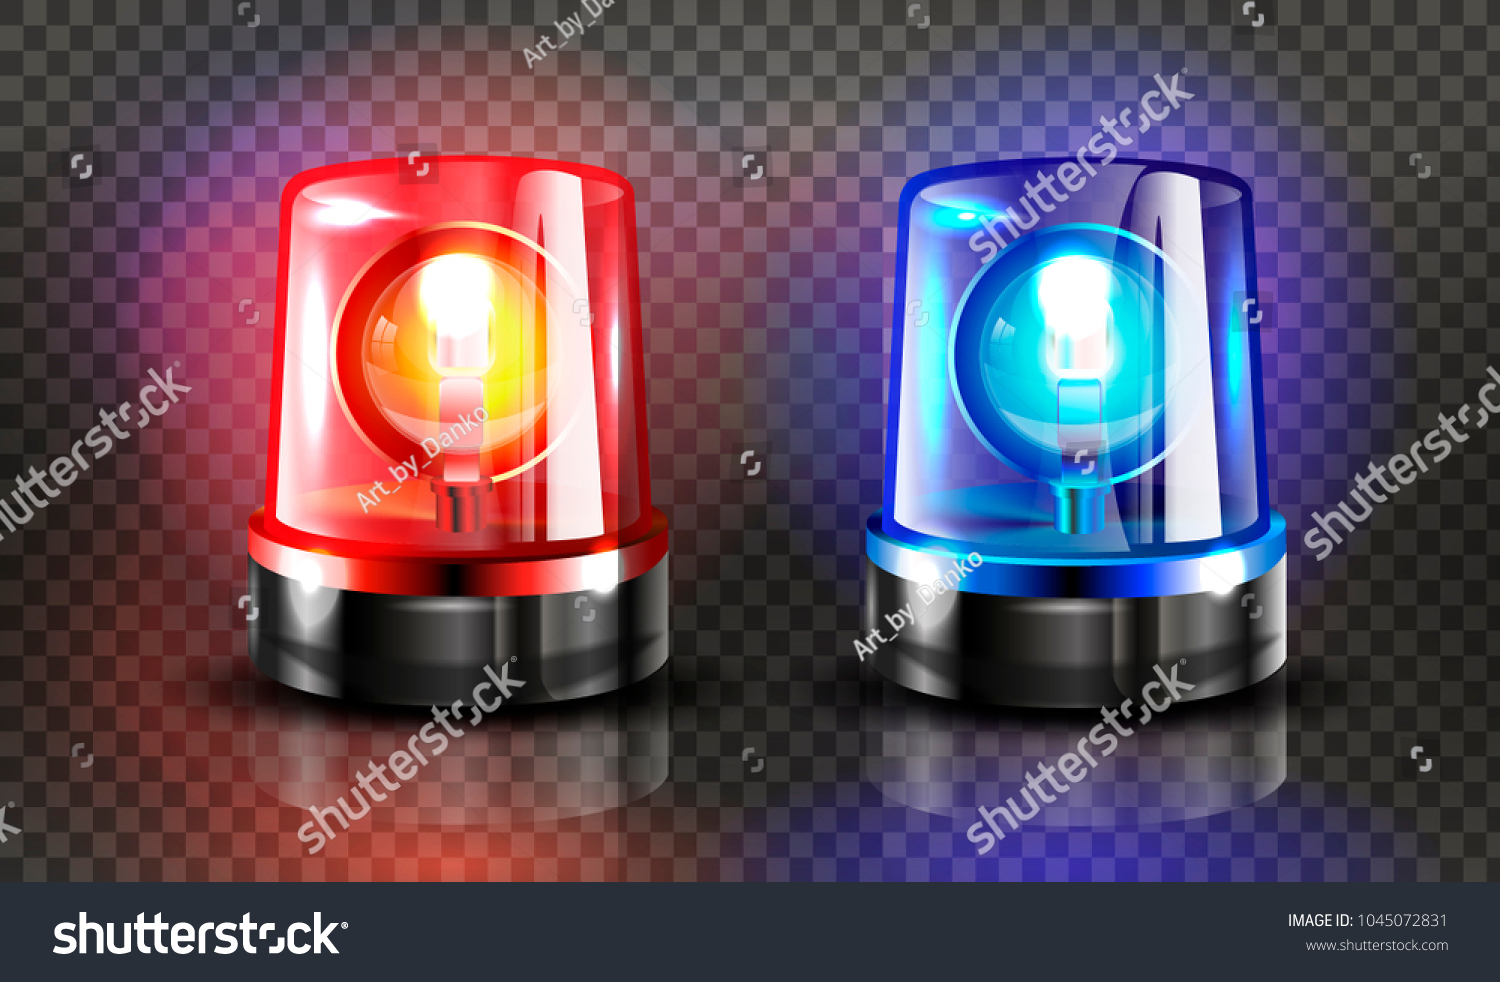 SVG of Red  and blue flashers Siren Vector. Realistic Object. Light Effect. Beacon For Police Cars Ambulance, Fire Trucks. Emergency Flashing Siren. Transparent Background vector Illustration svg